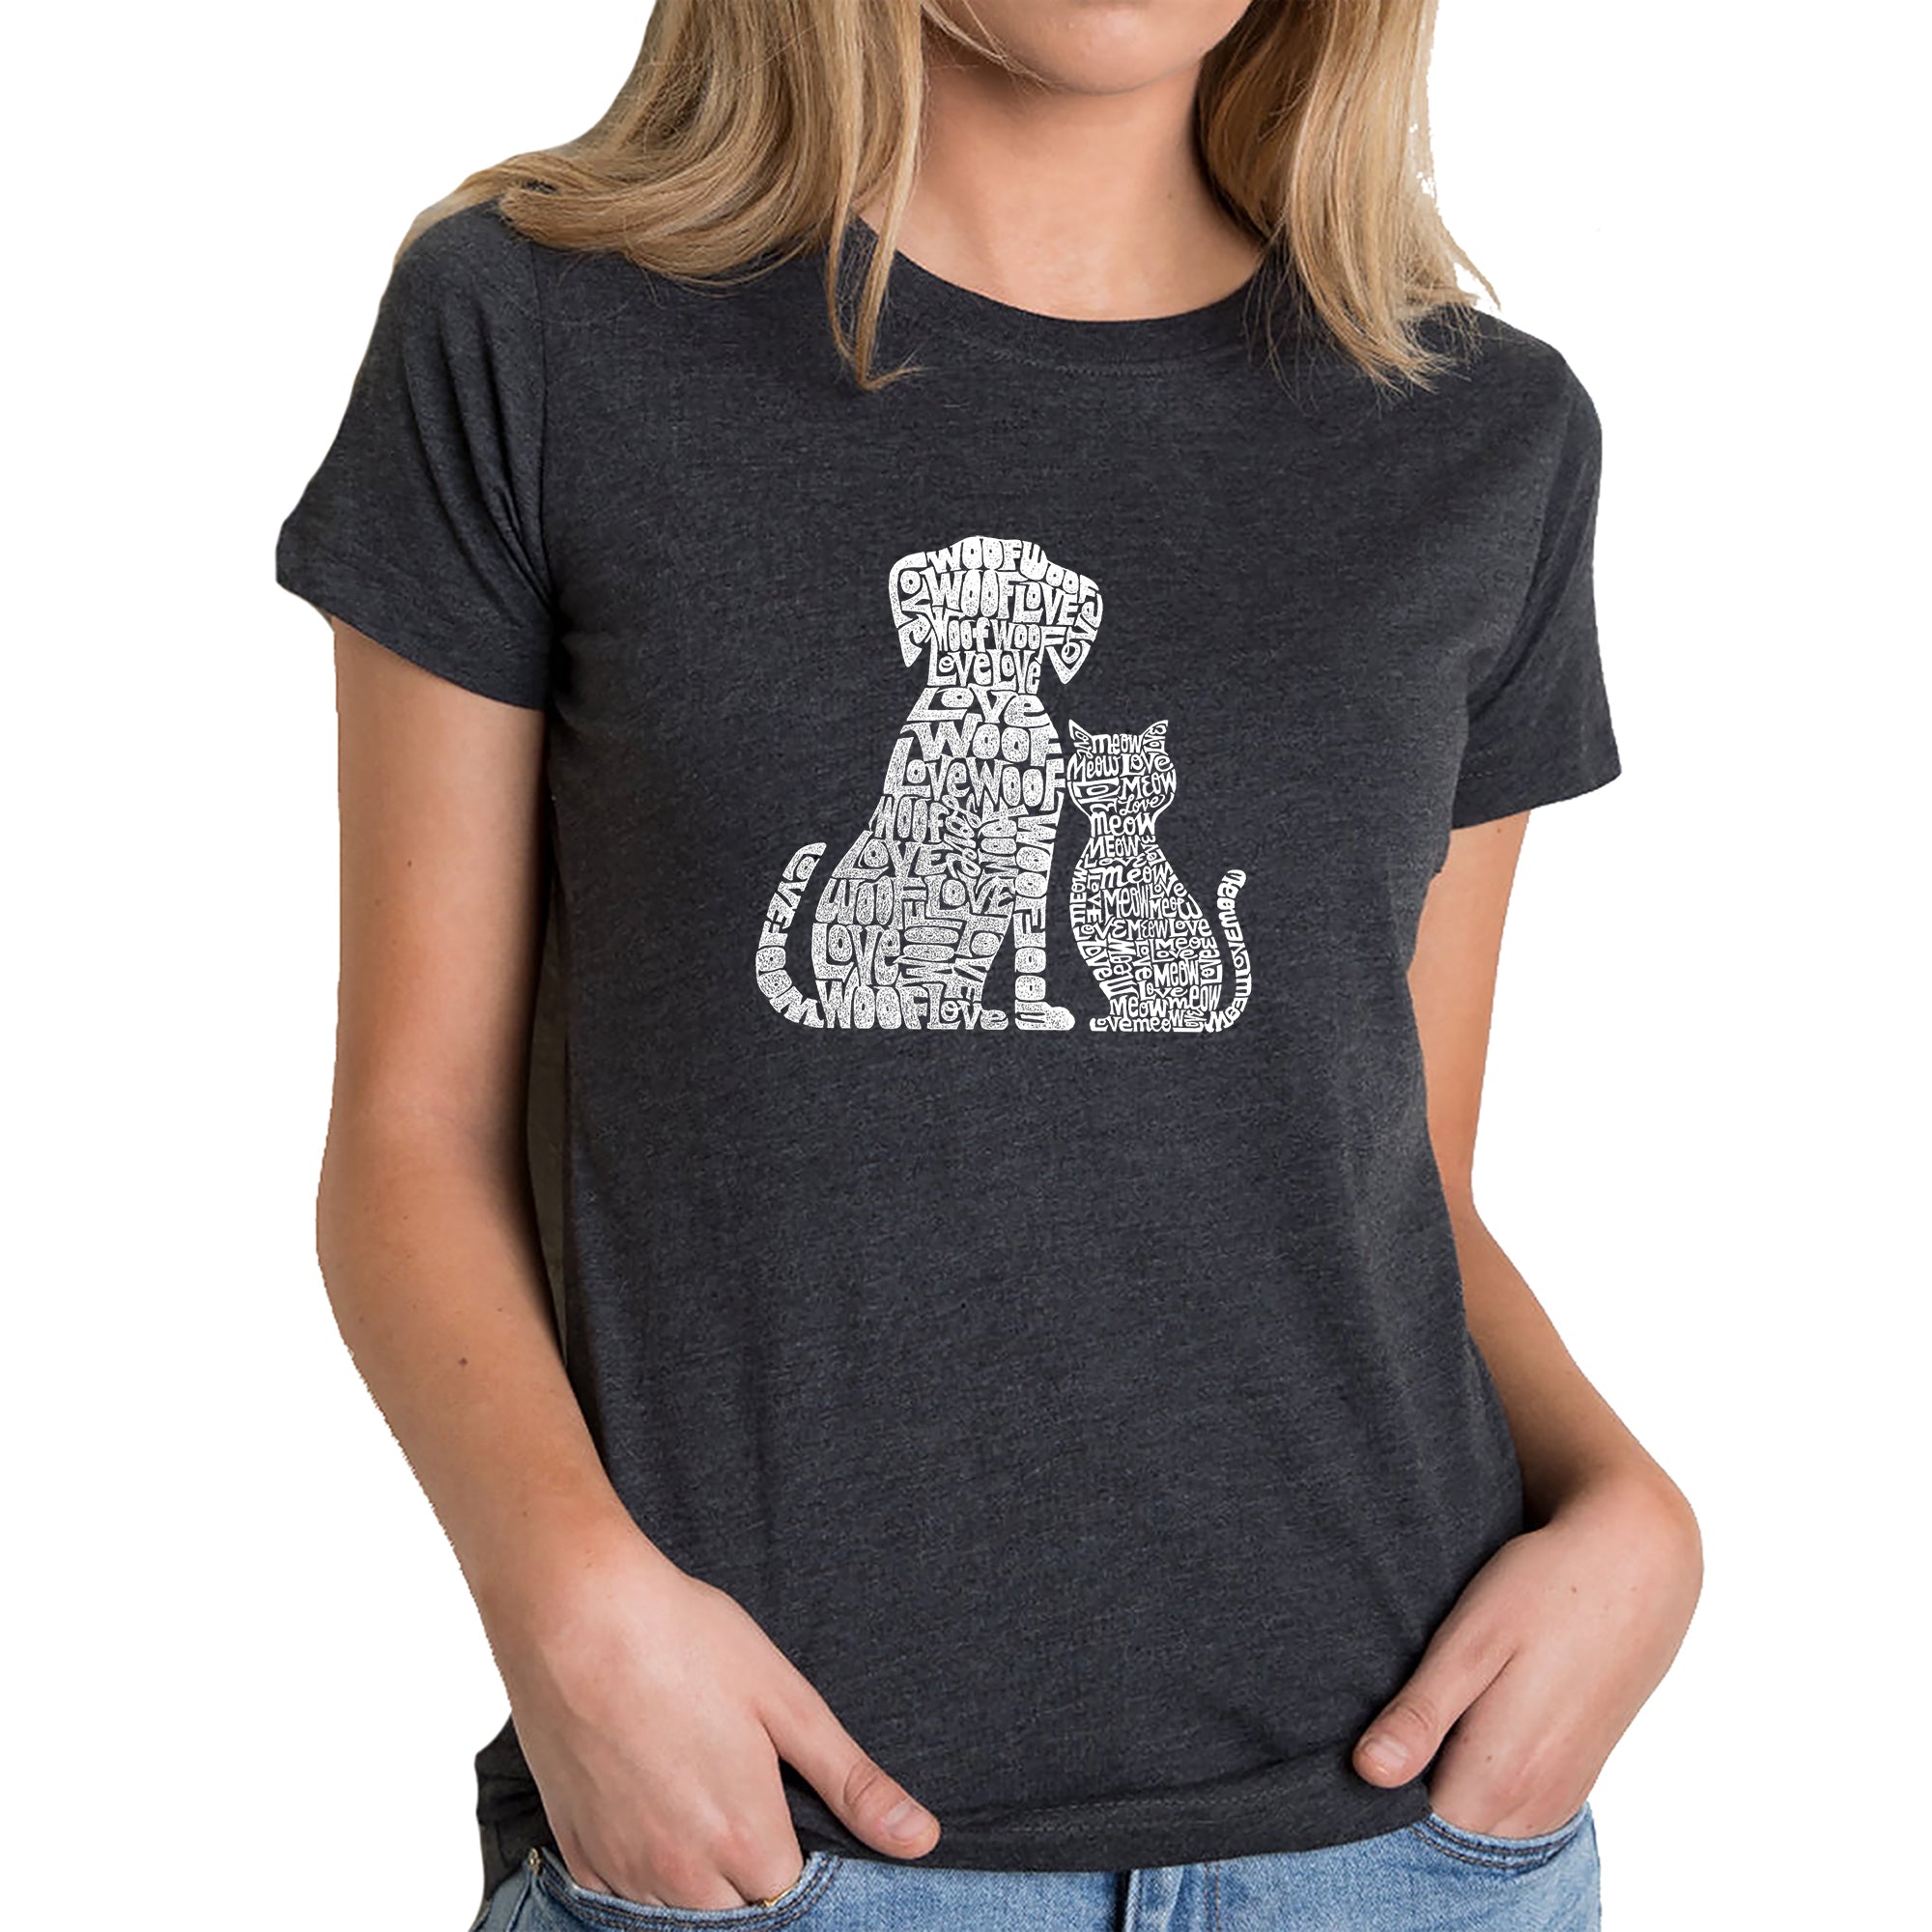 Dogs And Cats - Women's Premium Blend Word Art T-Shirt - Black - X-Large